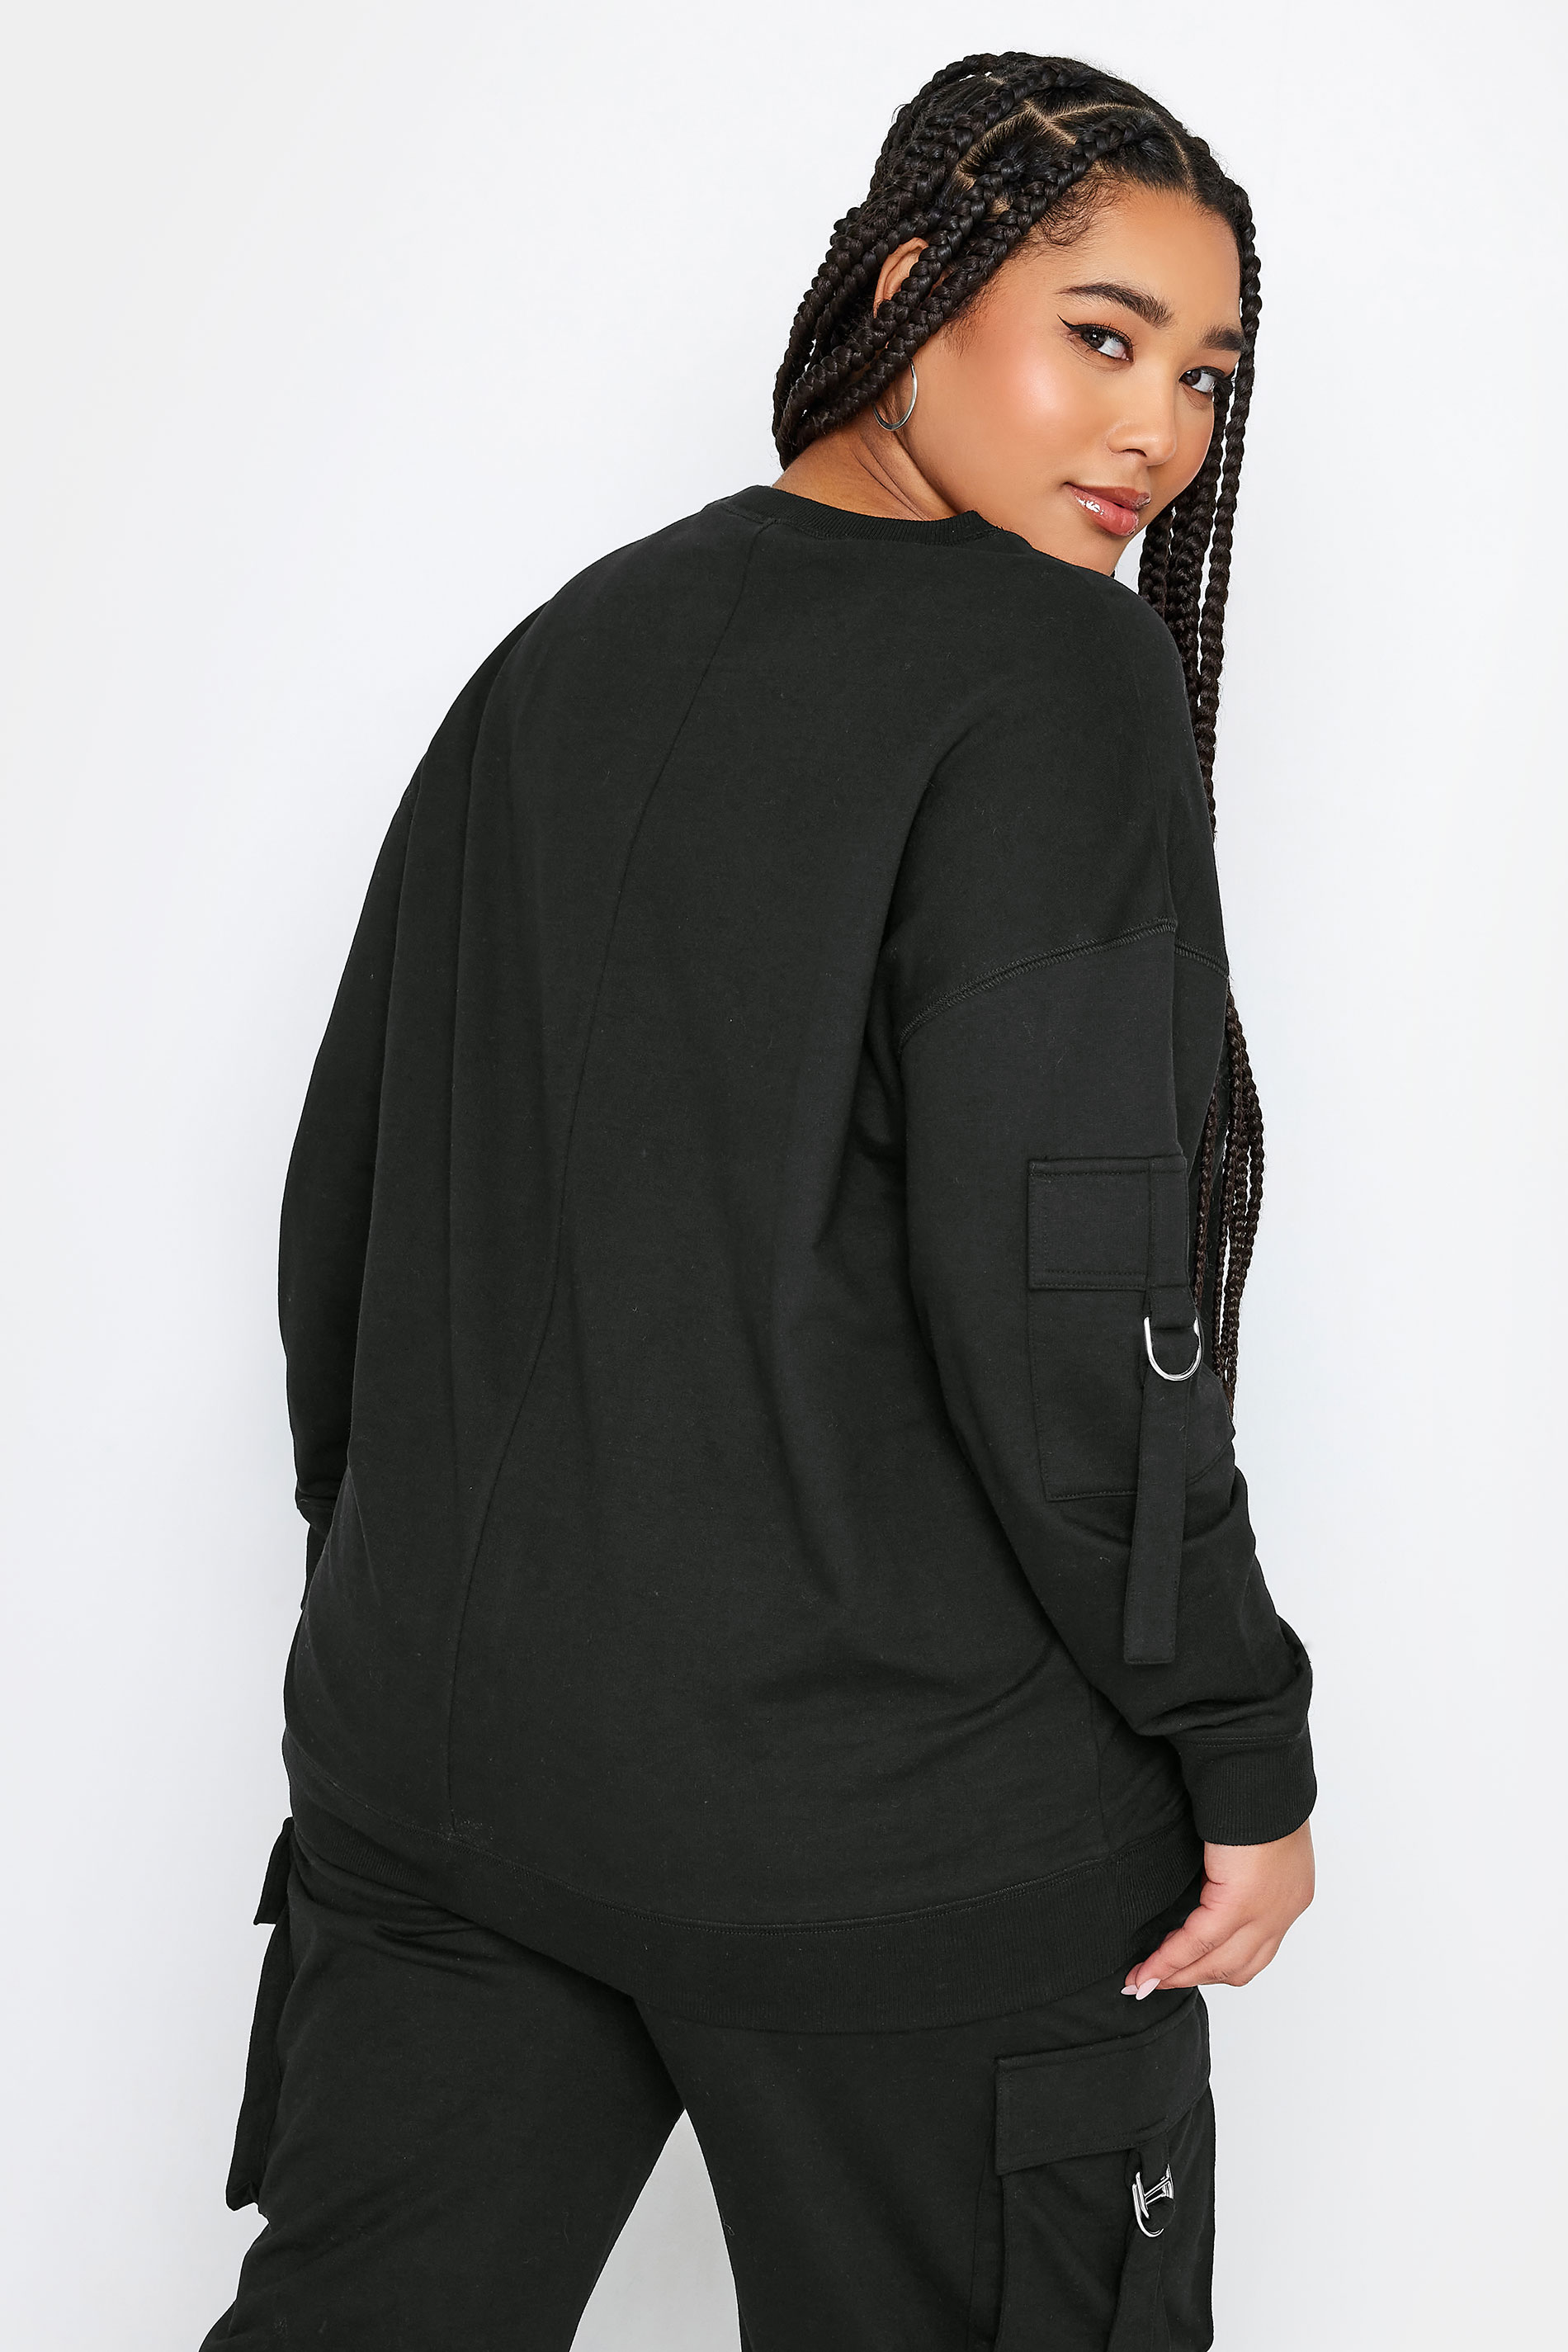 LIMITED COLLECTION Plus Size Black Utility Pocket Sweatshirt | Yours Clothing 3